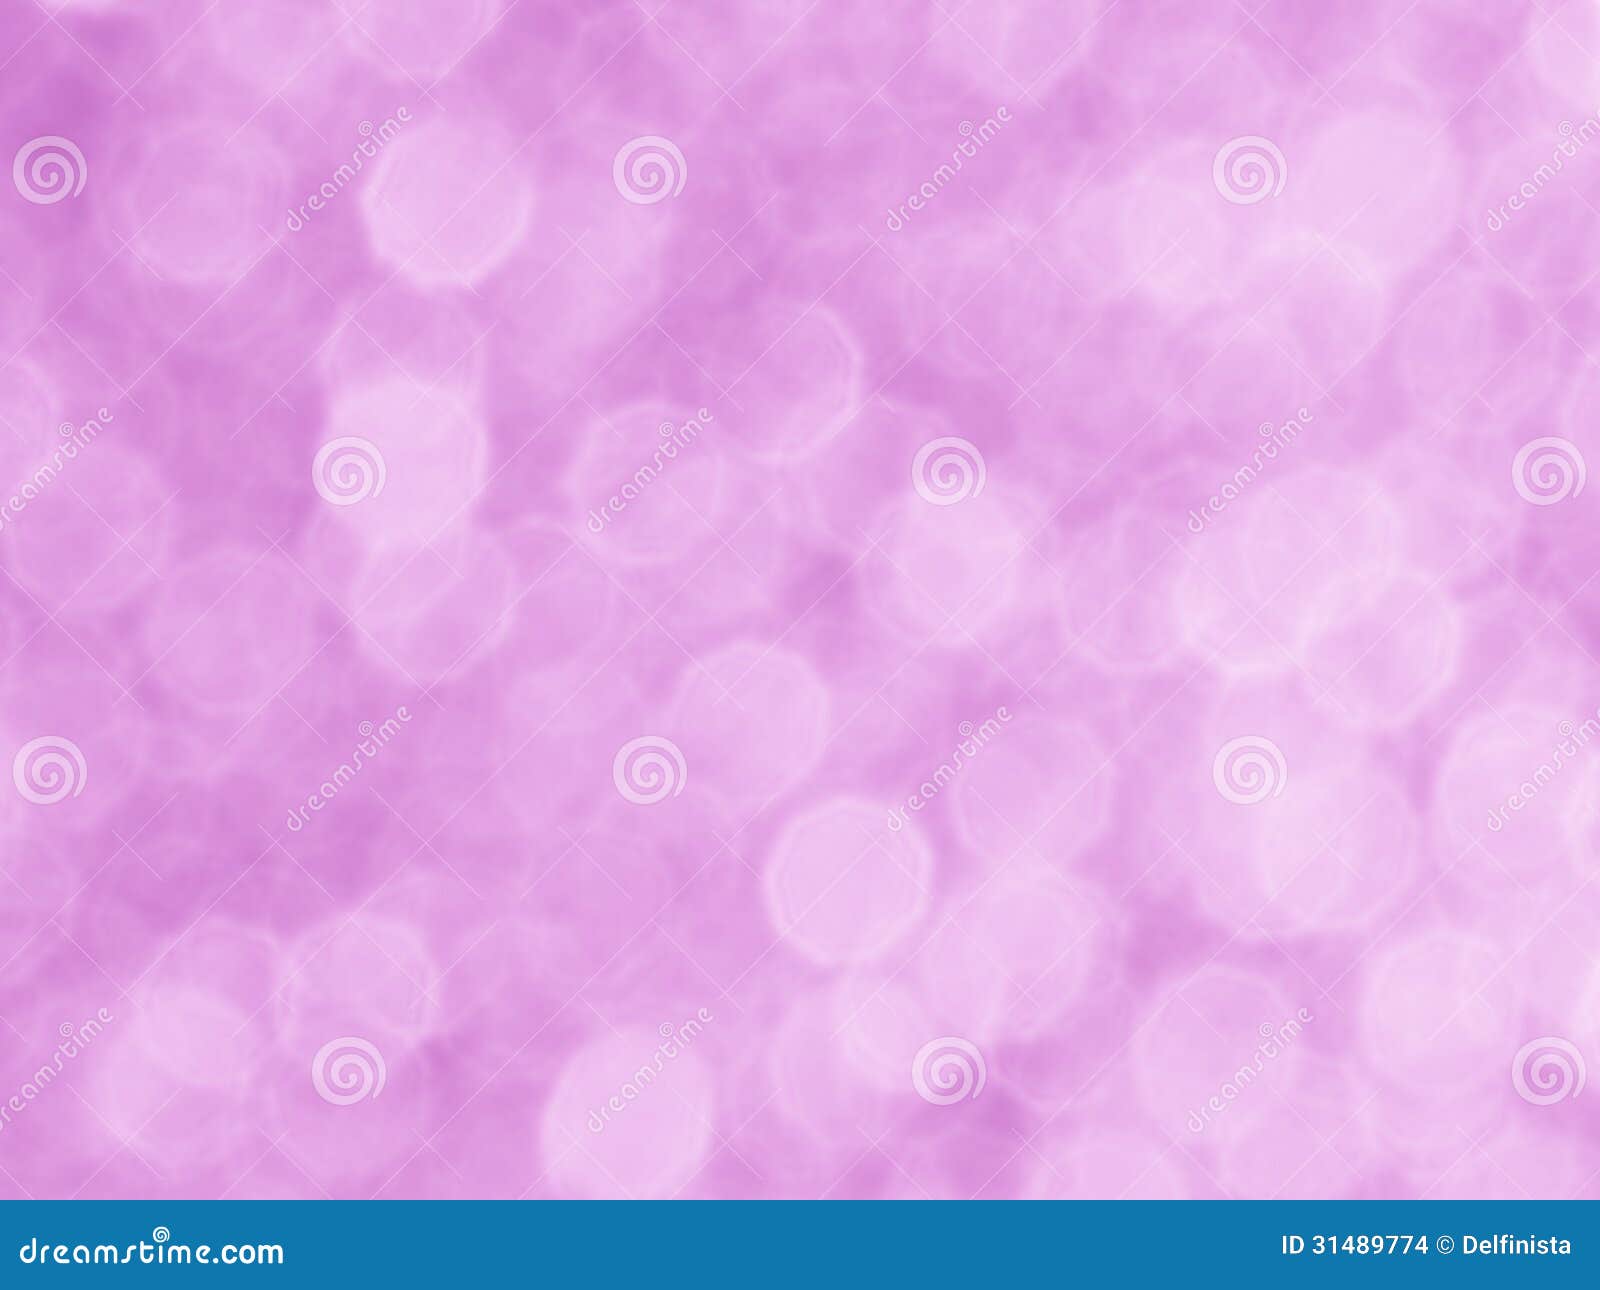 23 323 Purple Background Blur Wallpaper Photos Free Royalty Free Stock Photos From Dreamstime